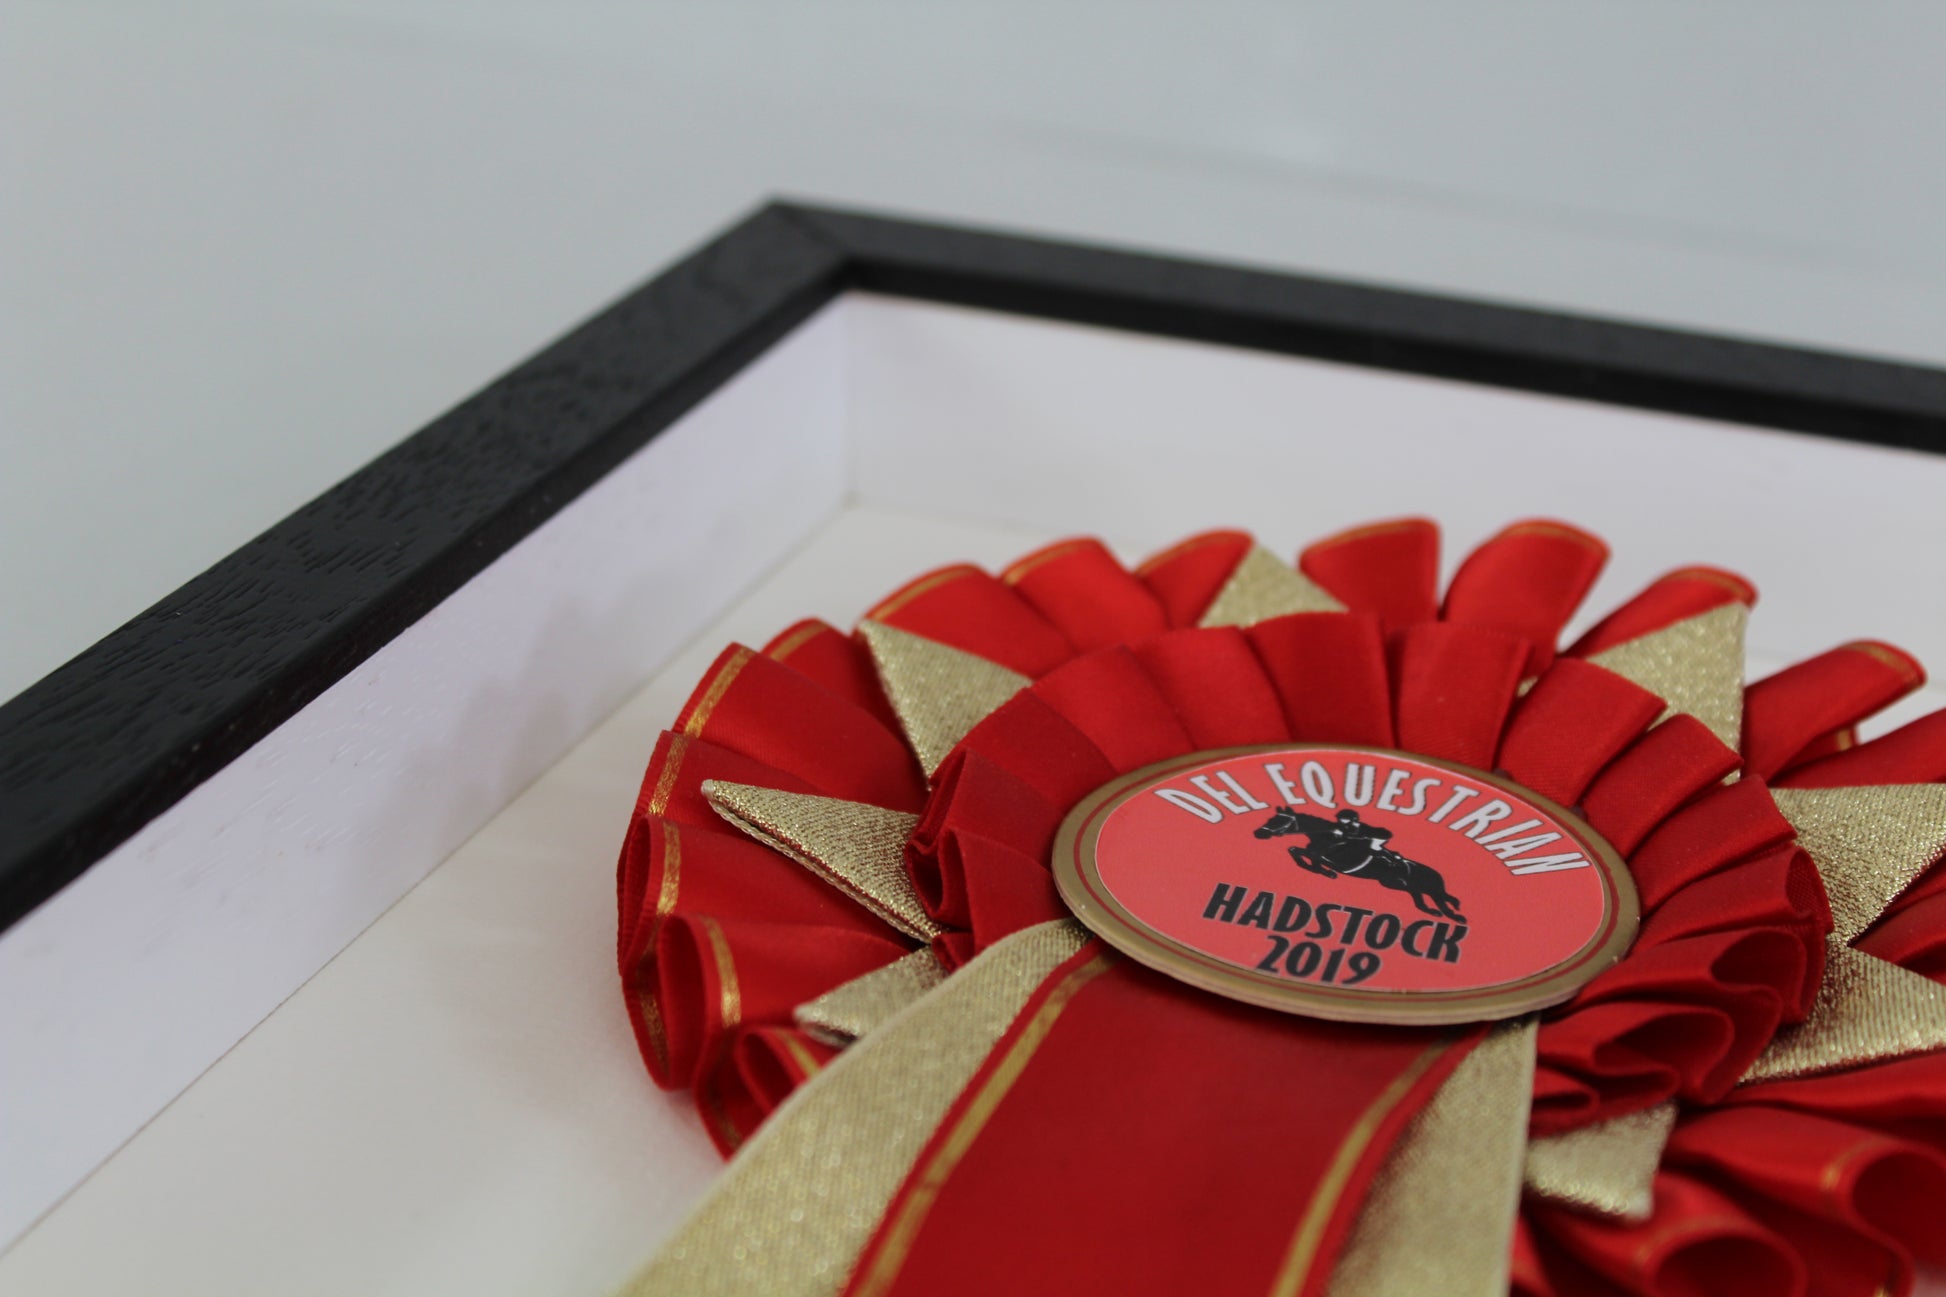 Rosette Display Frame. 20x50. Suits one Rosette. Horse Competitions. Dog Shows. Agricultural Shows. - PhotoFramesandMore - Wooden Picture Frames